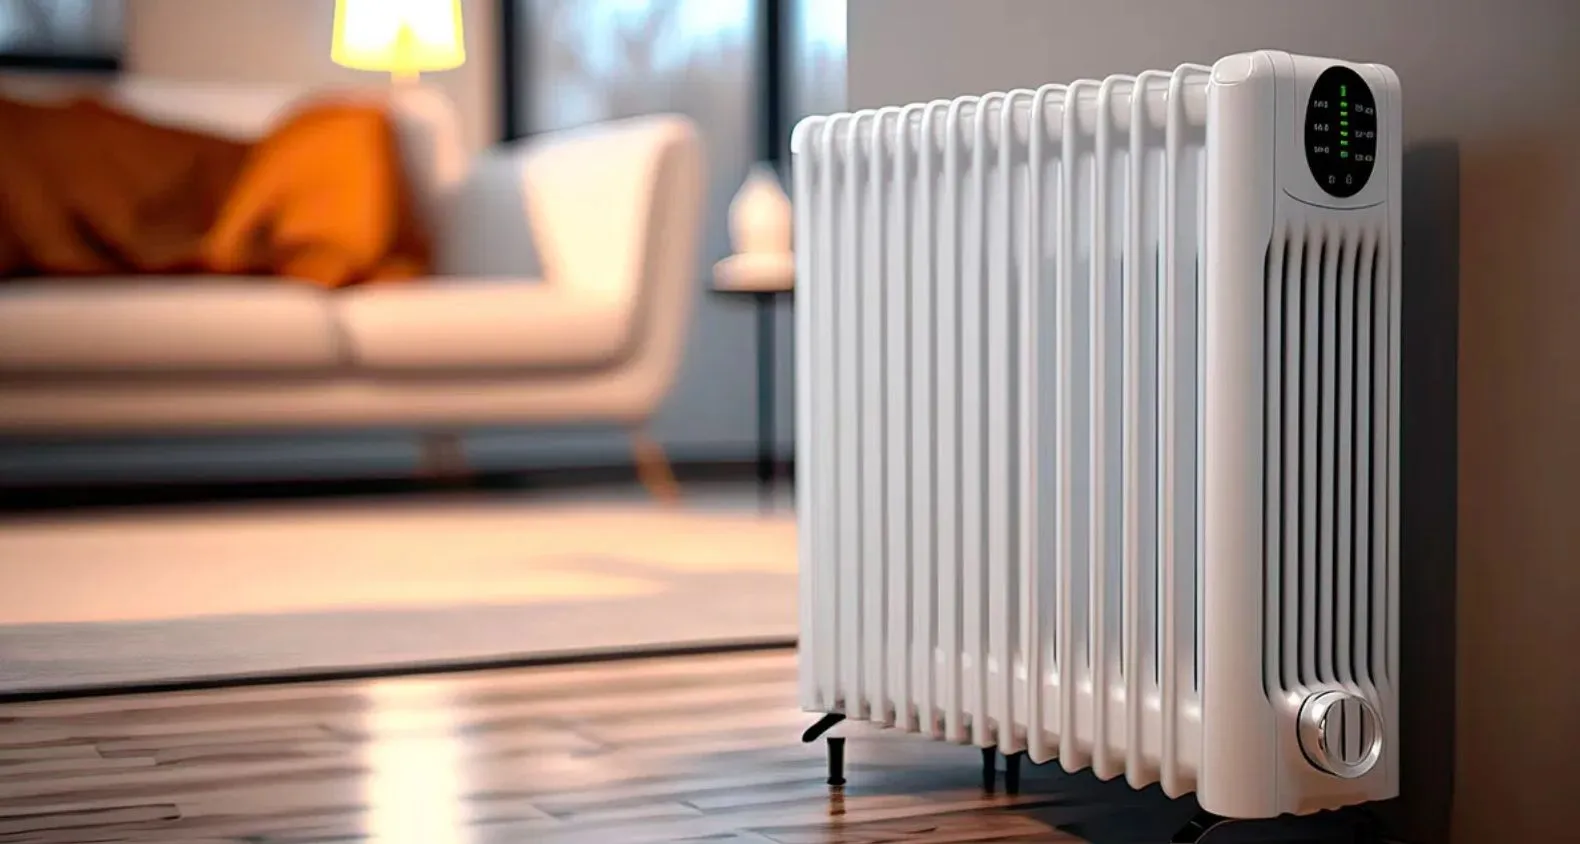 This image showcases a range of the best electric heaters, offering a variety of features and designs to keep your home cozy.